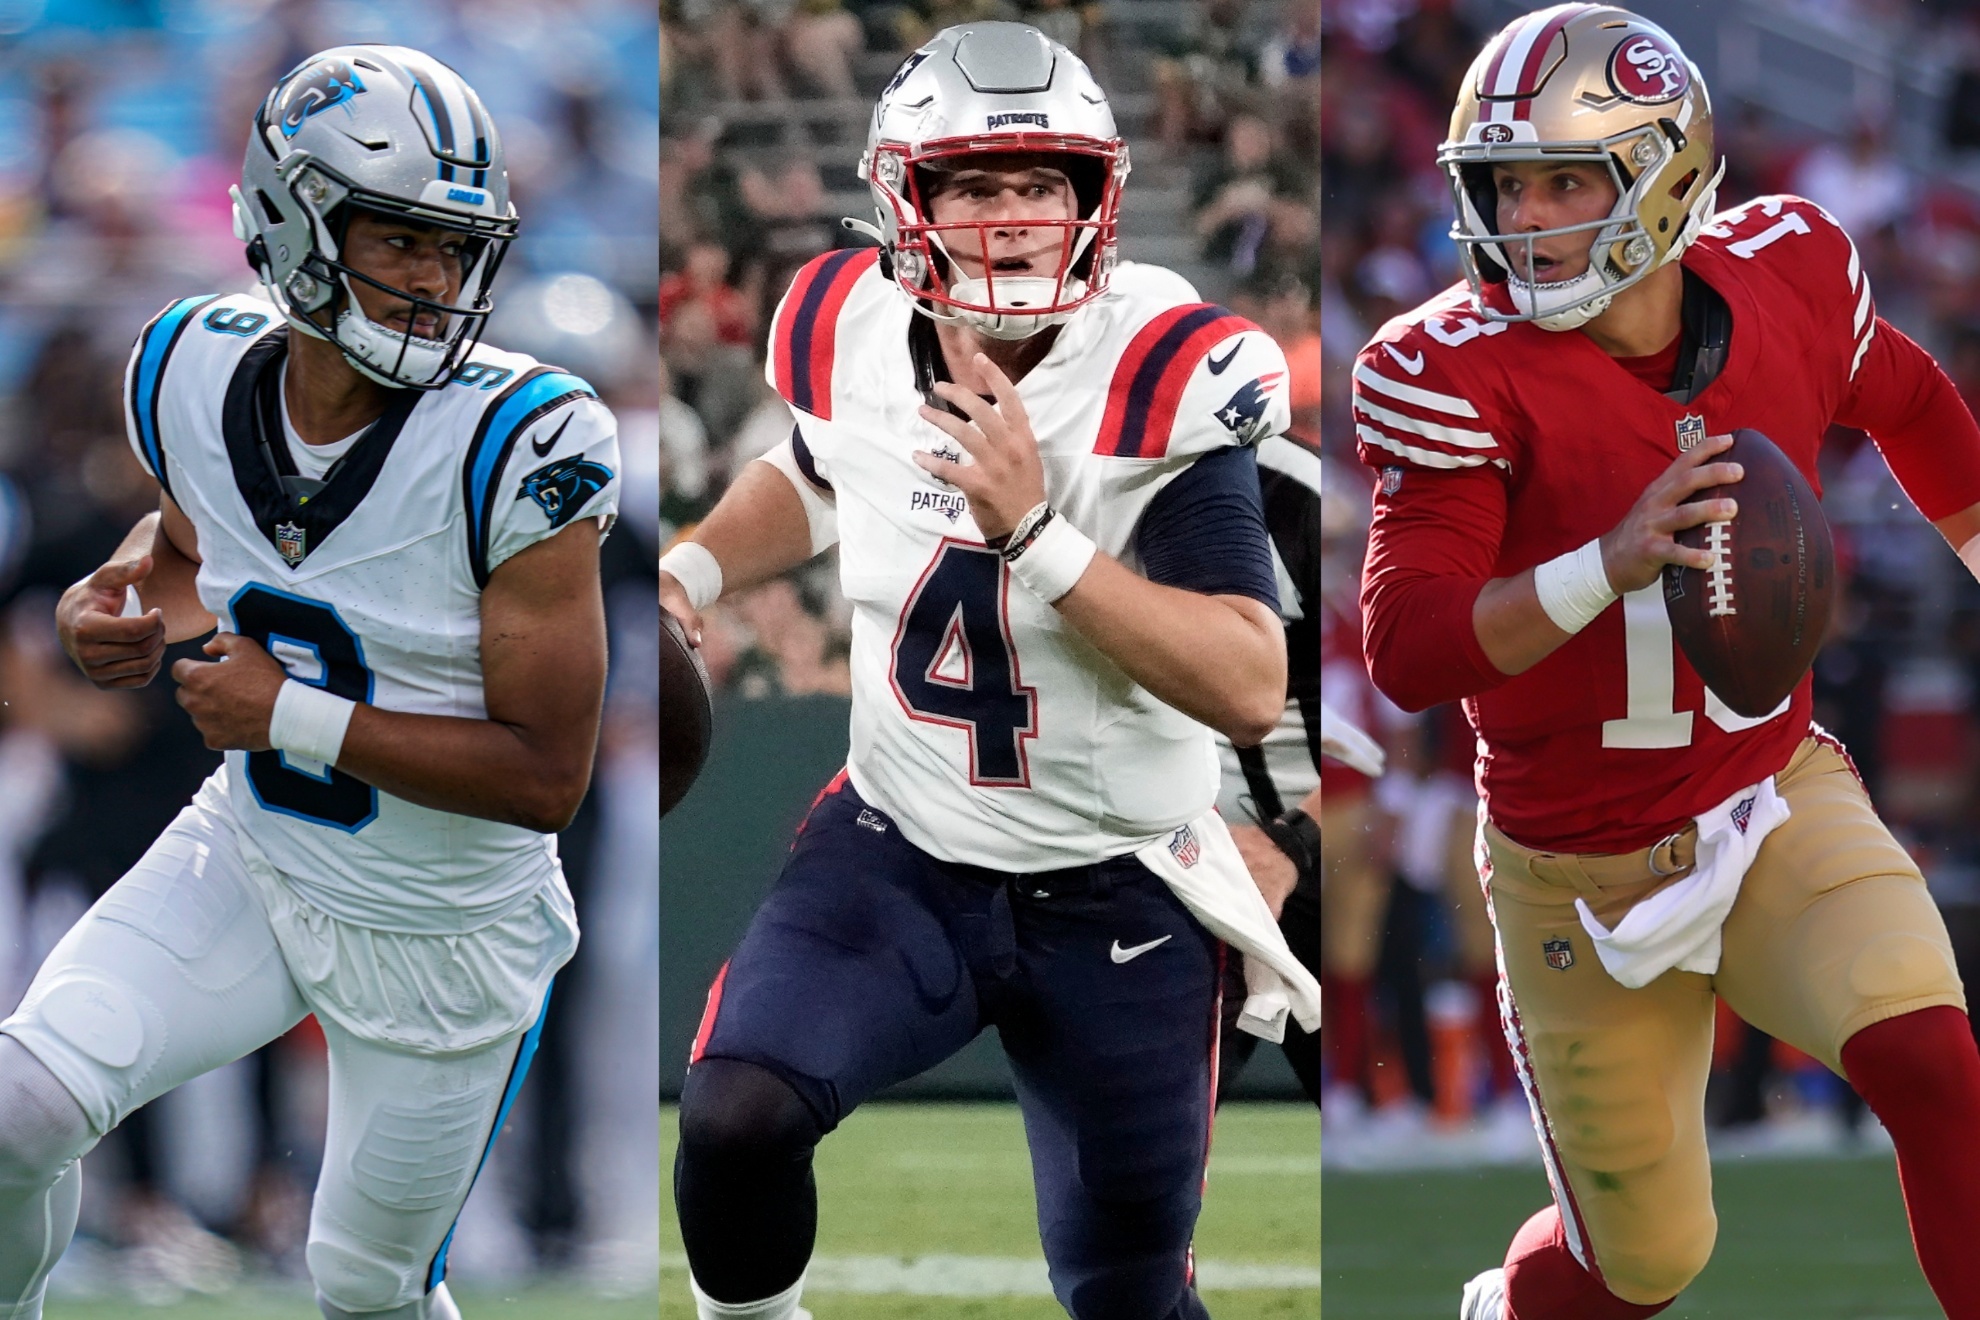 NFL Preseason 2023 schedule: Lions, Patriots, 49ers every game